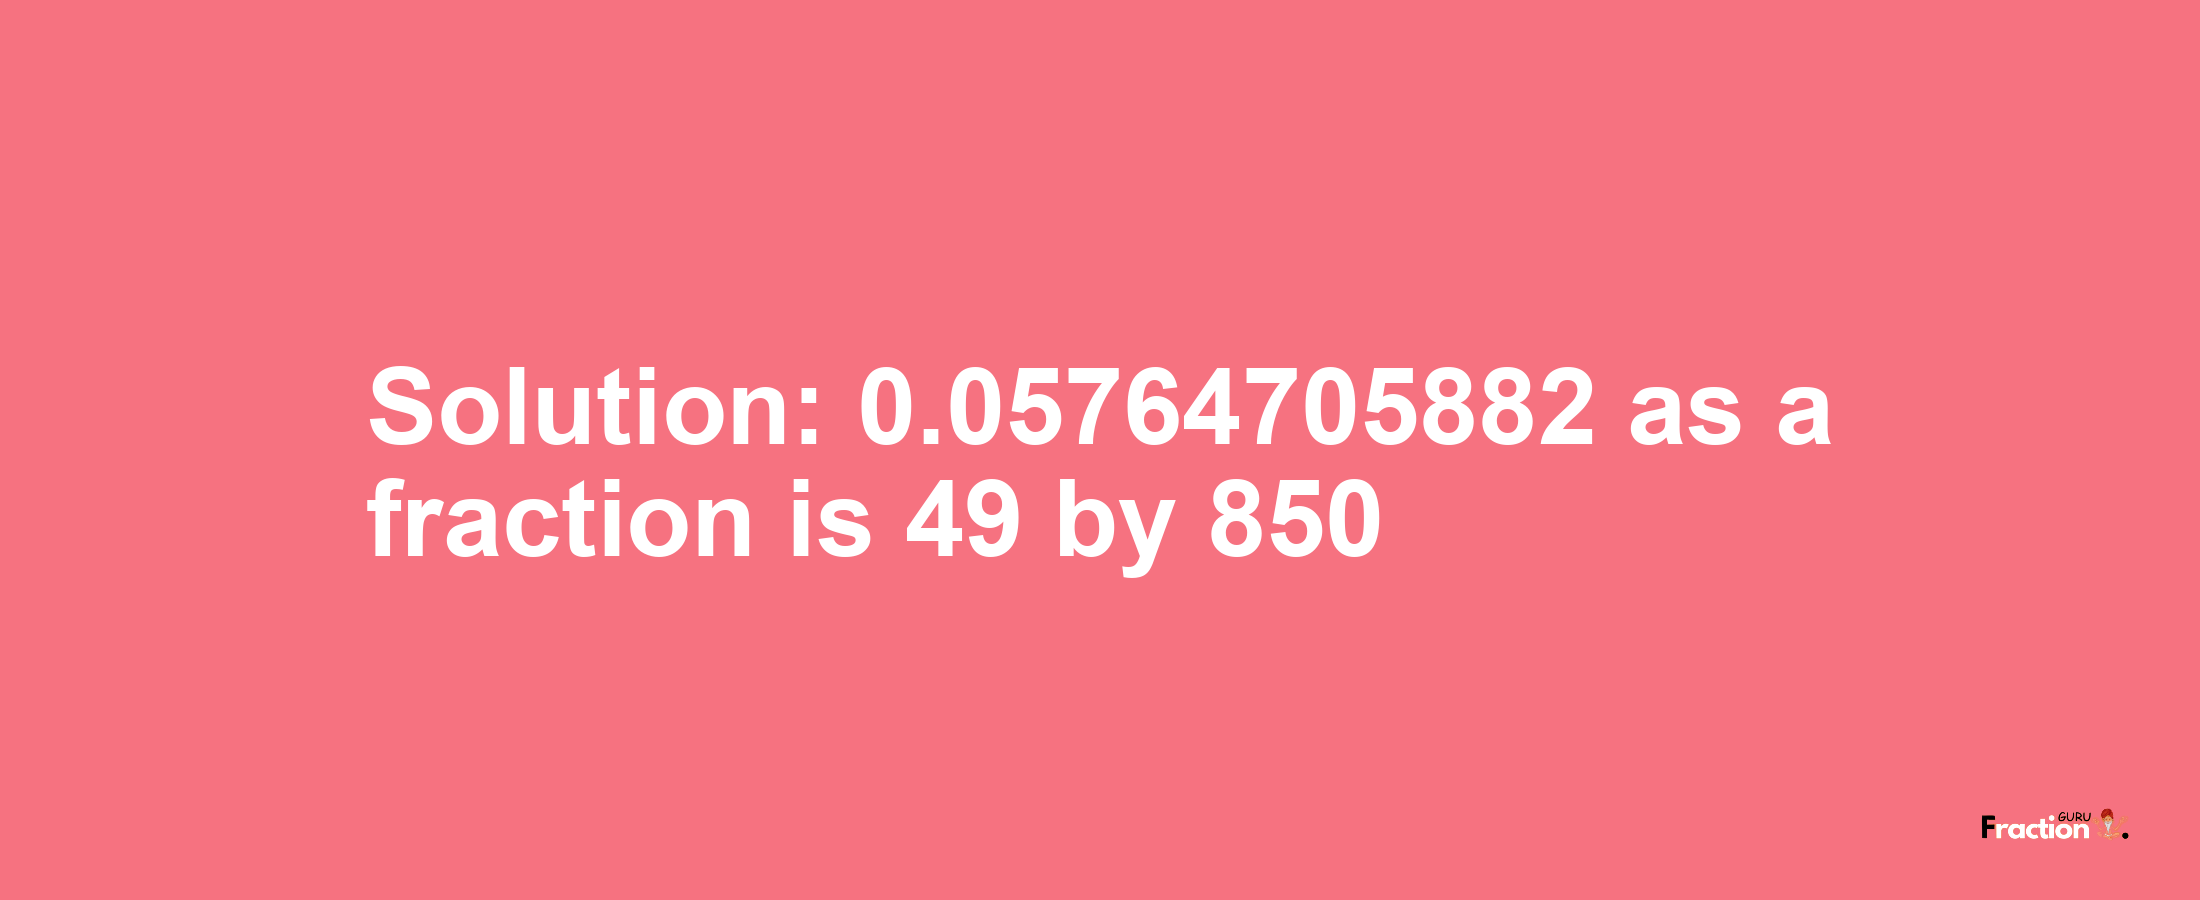 Solution:0.05764705882 as a fraction is 49/850